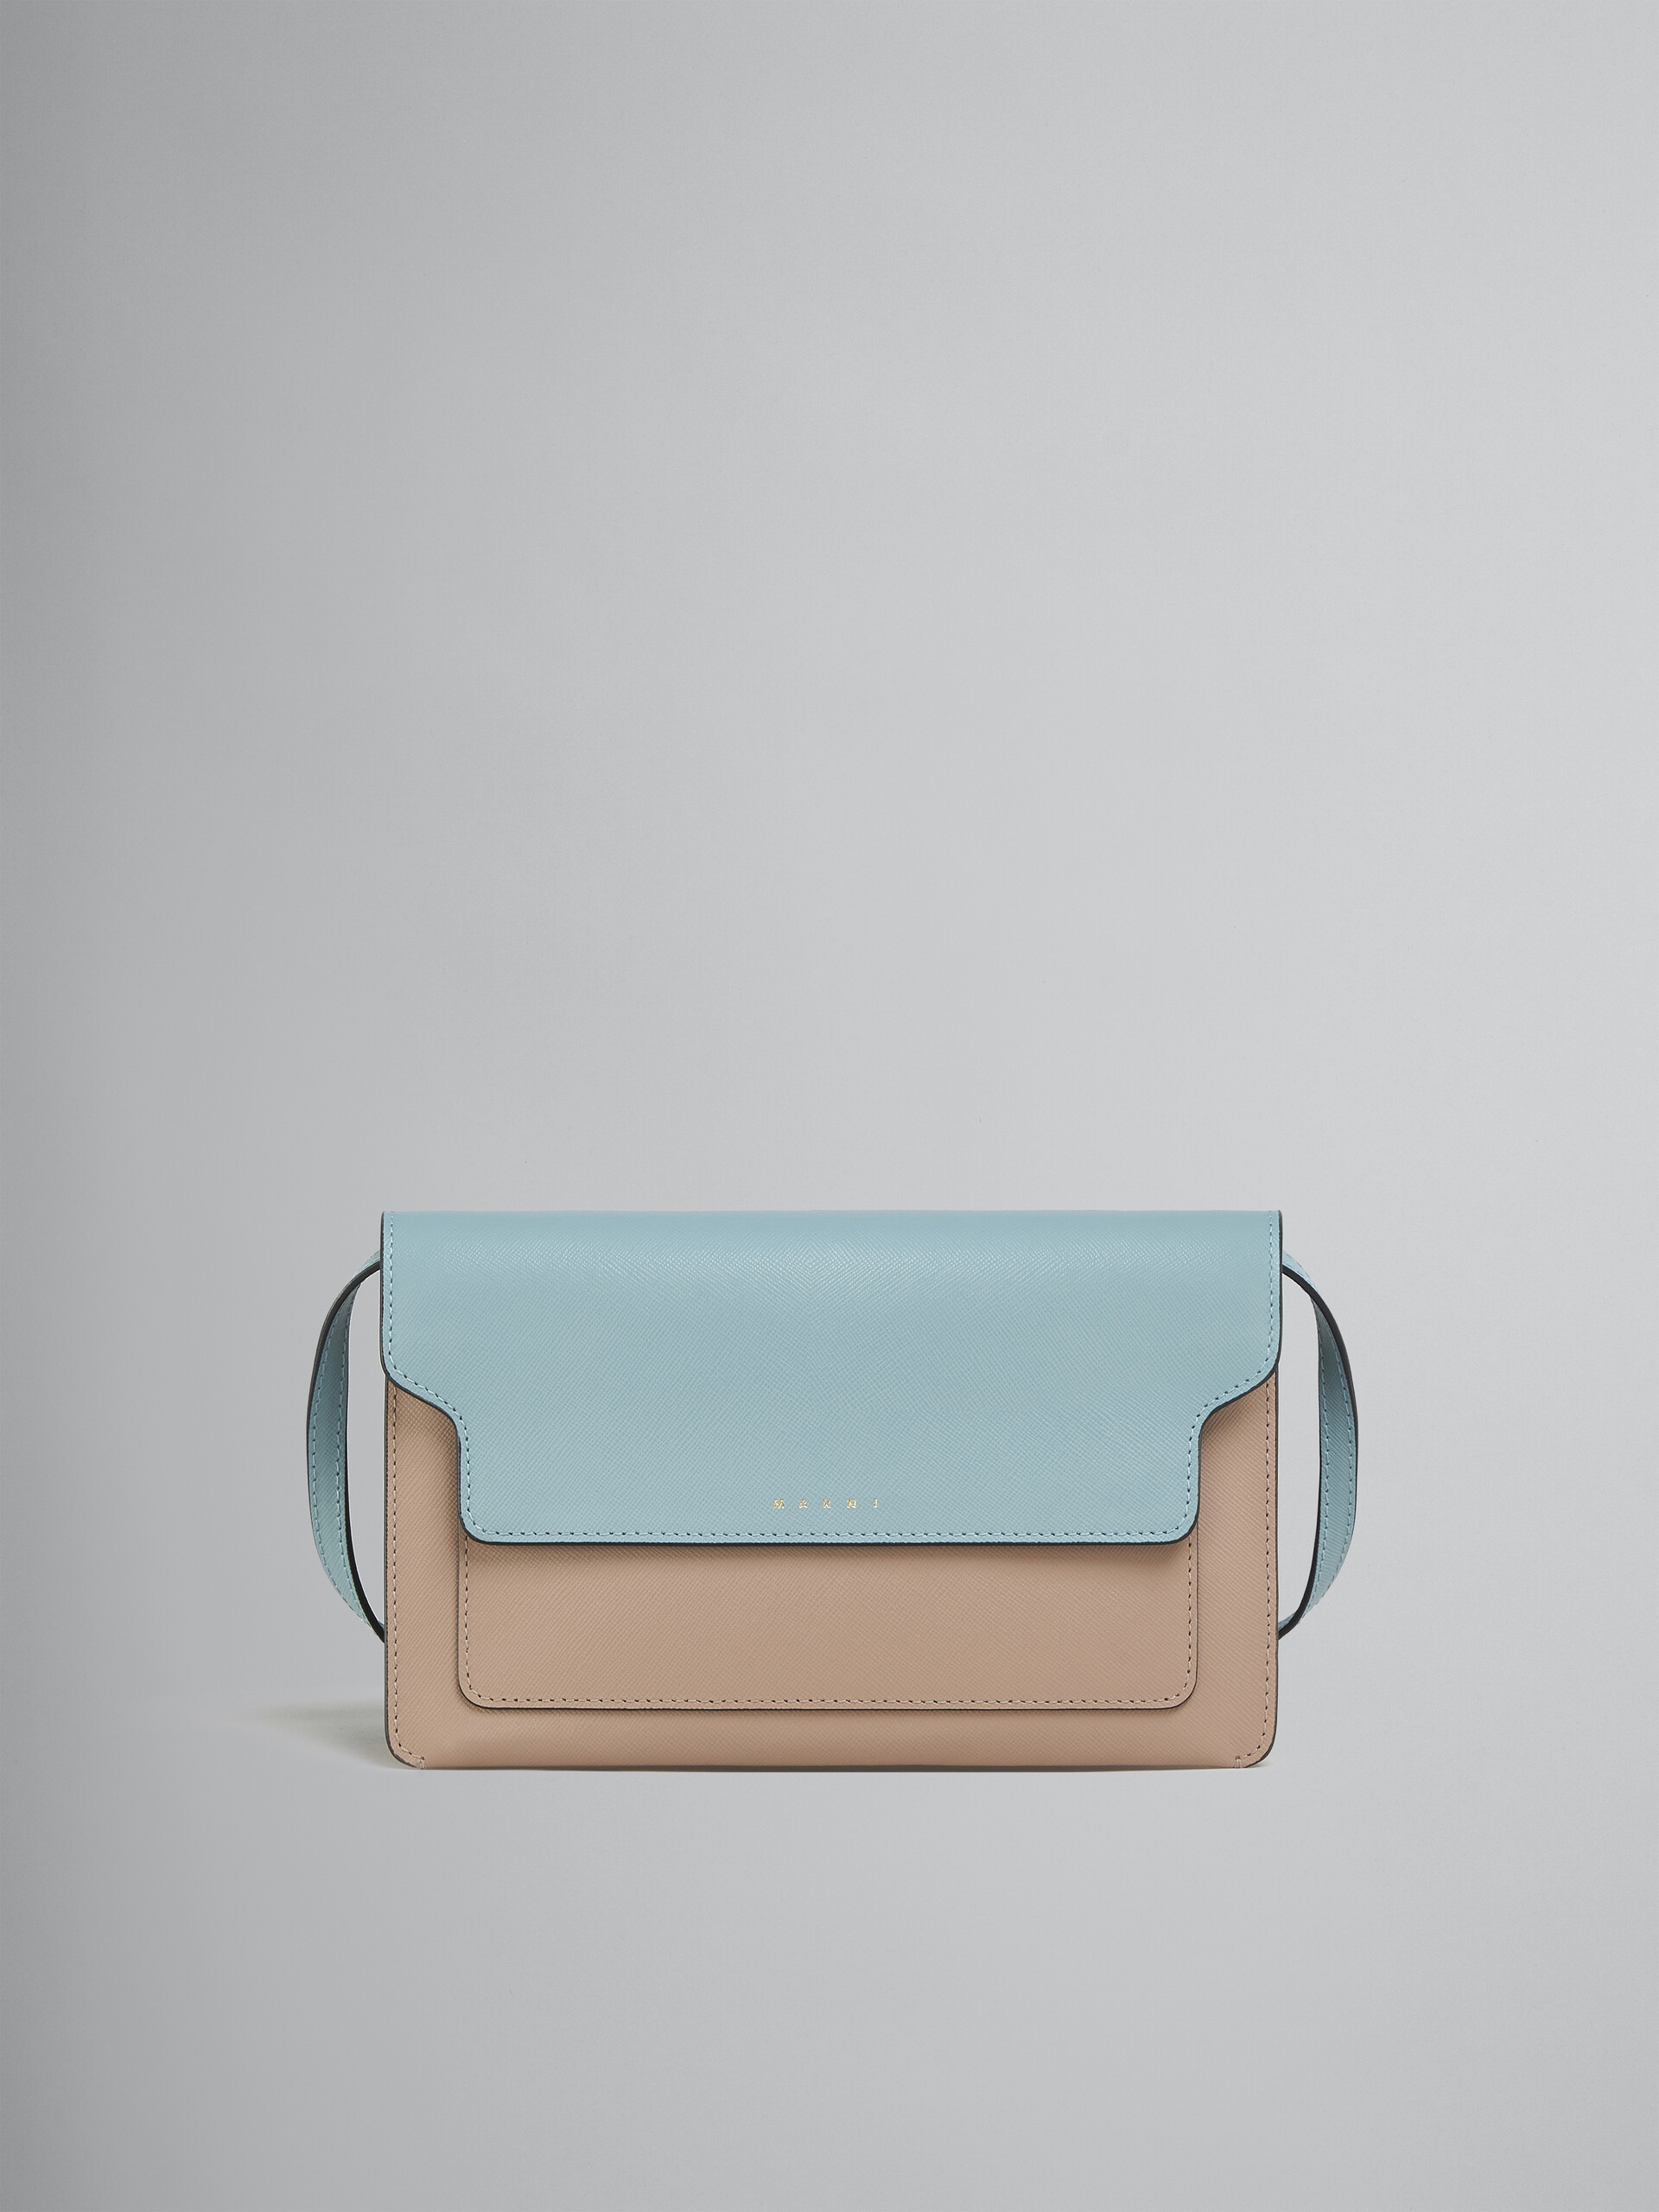 Trunk Clutch in light blue beige and white saffiano leather - Pochettes - Image 1